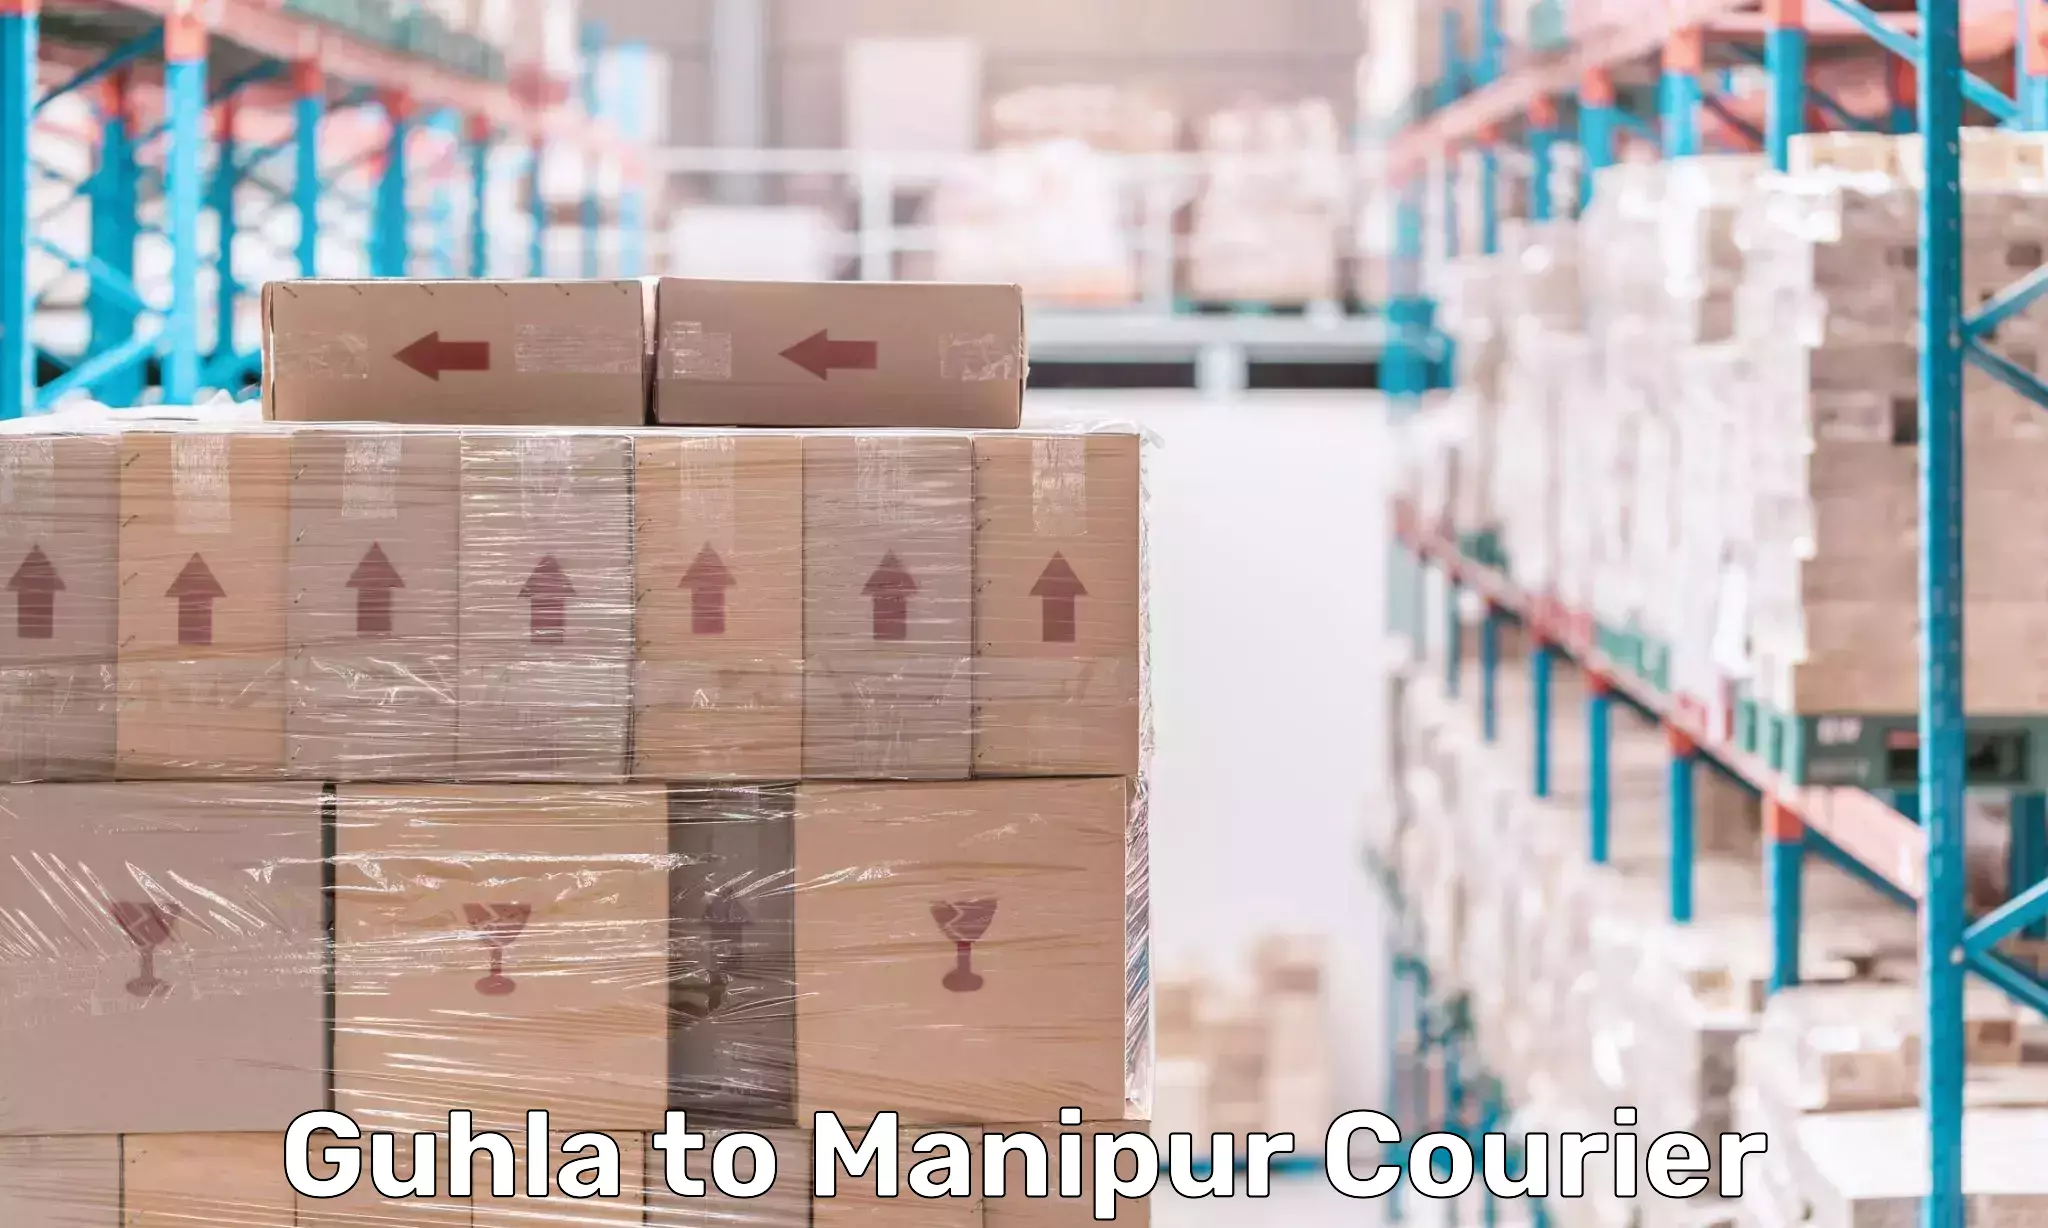 Nationwide delivery network Guhla to Manipur